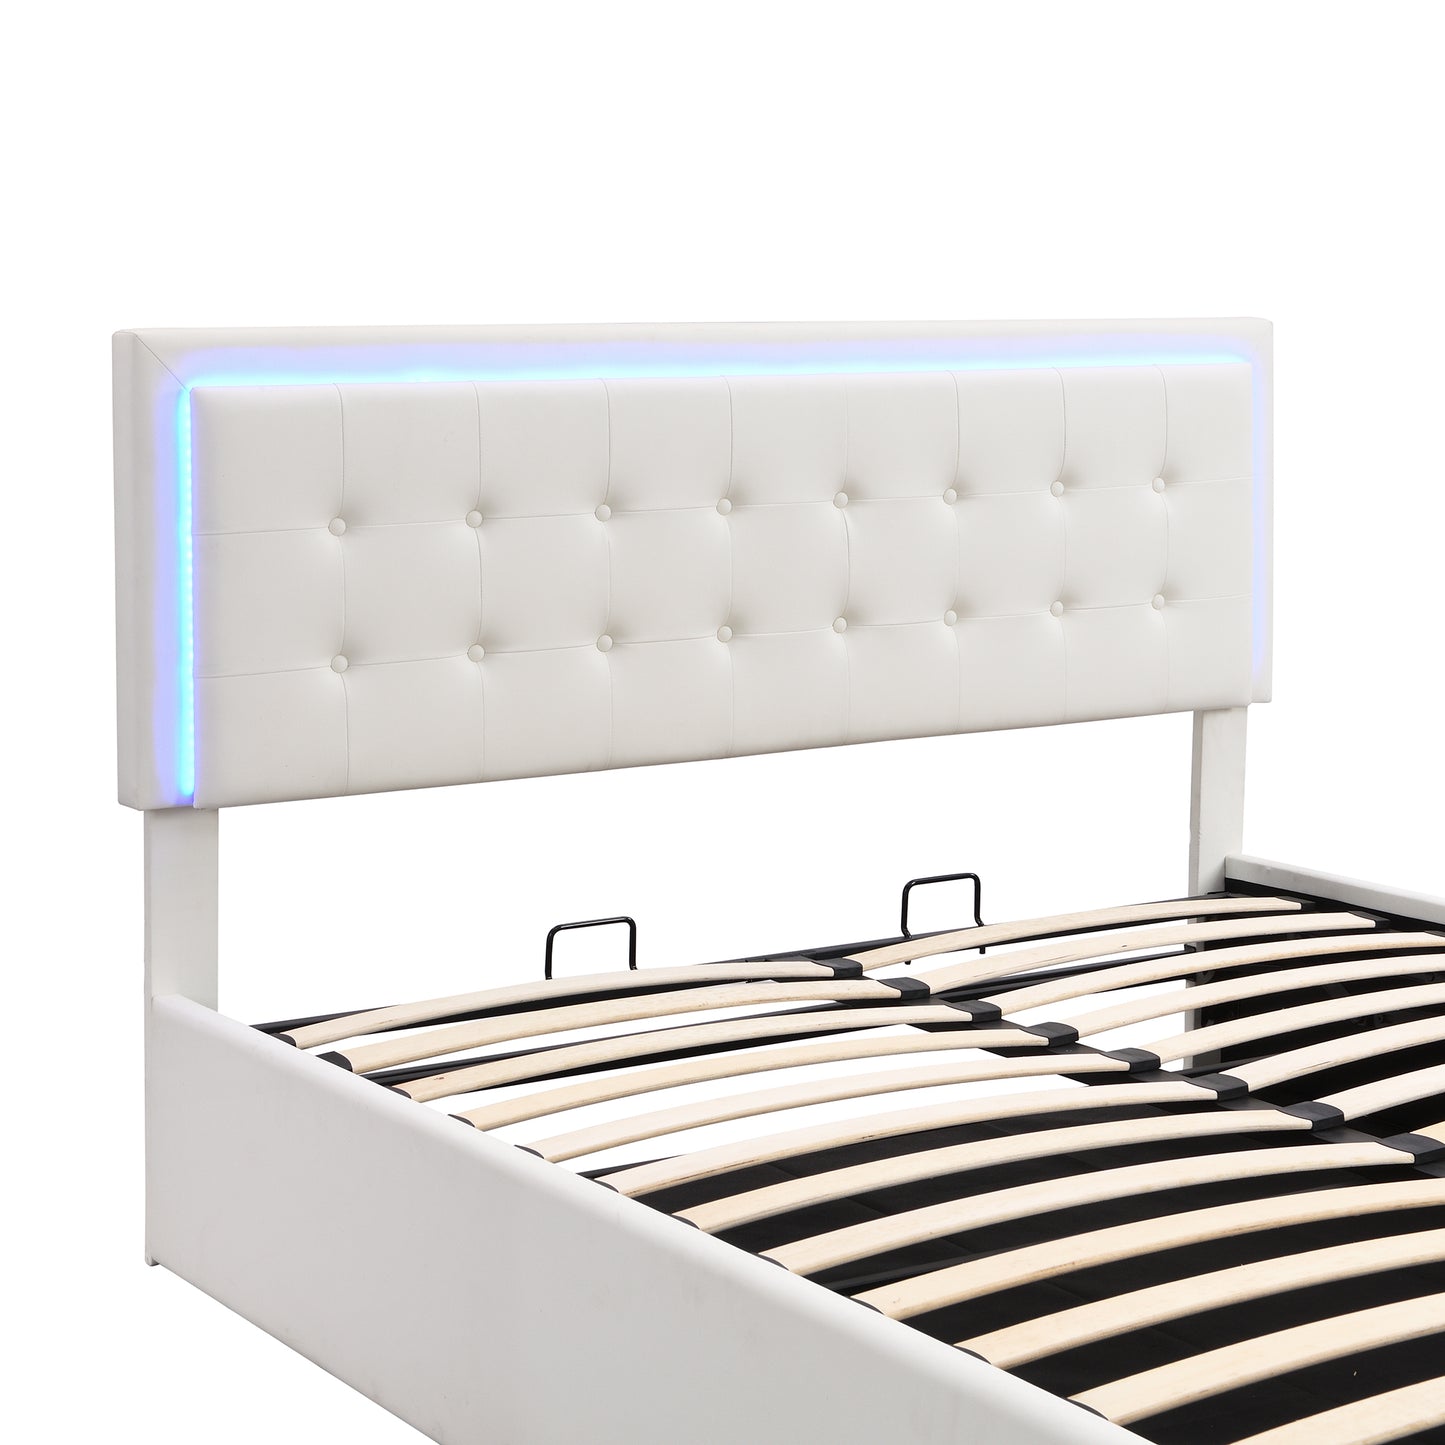 Queen Size Tufted Upholstered Platform Bed with Hydraulic Storage System,PU Storage Bed with LED Lights,White